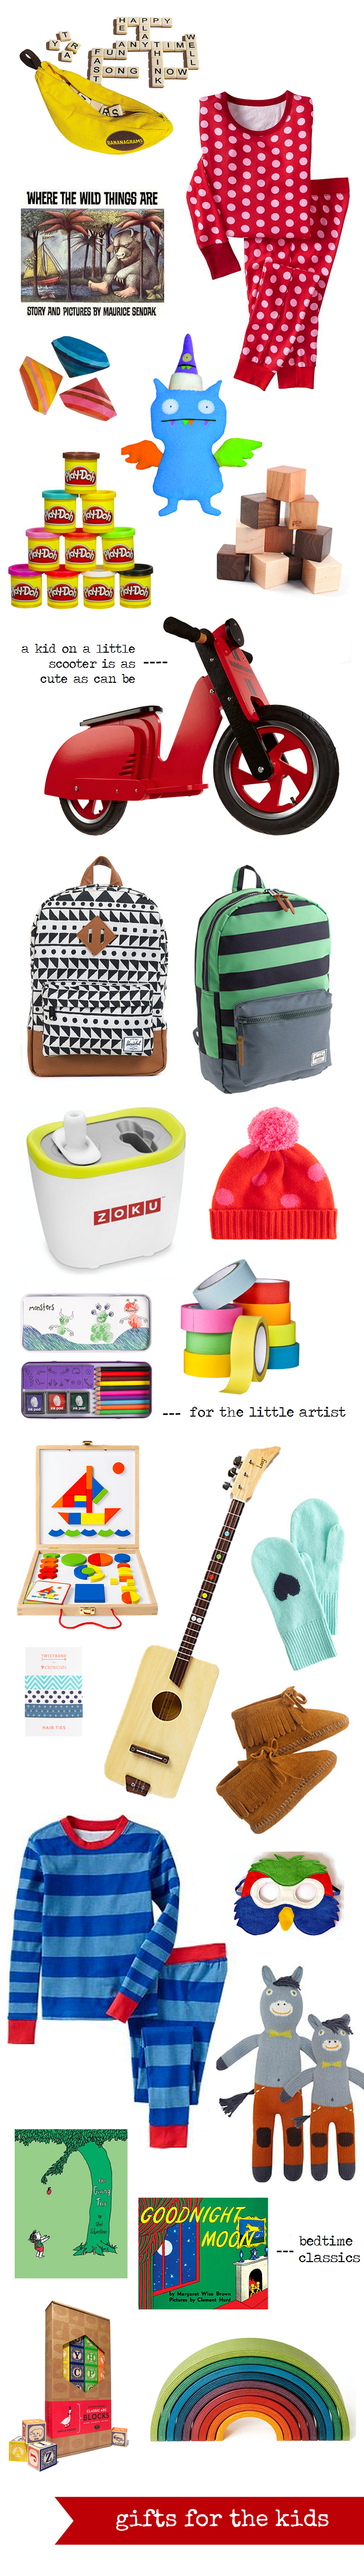 Holiday Gift Guide For the Kiddos